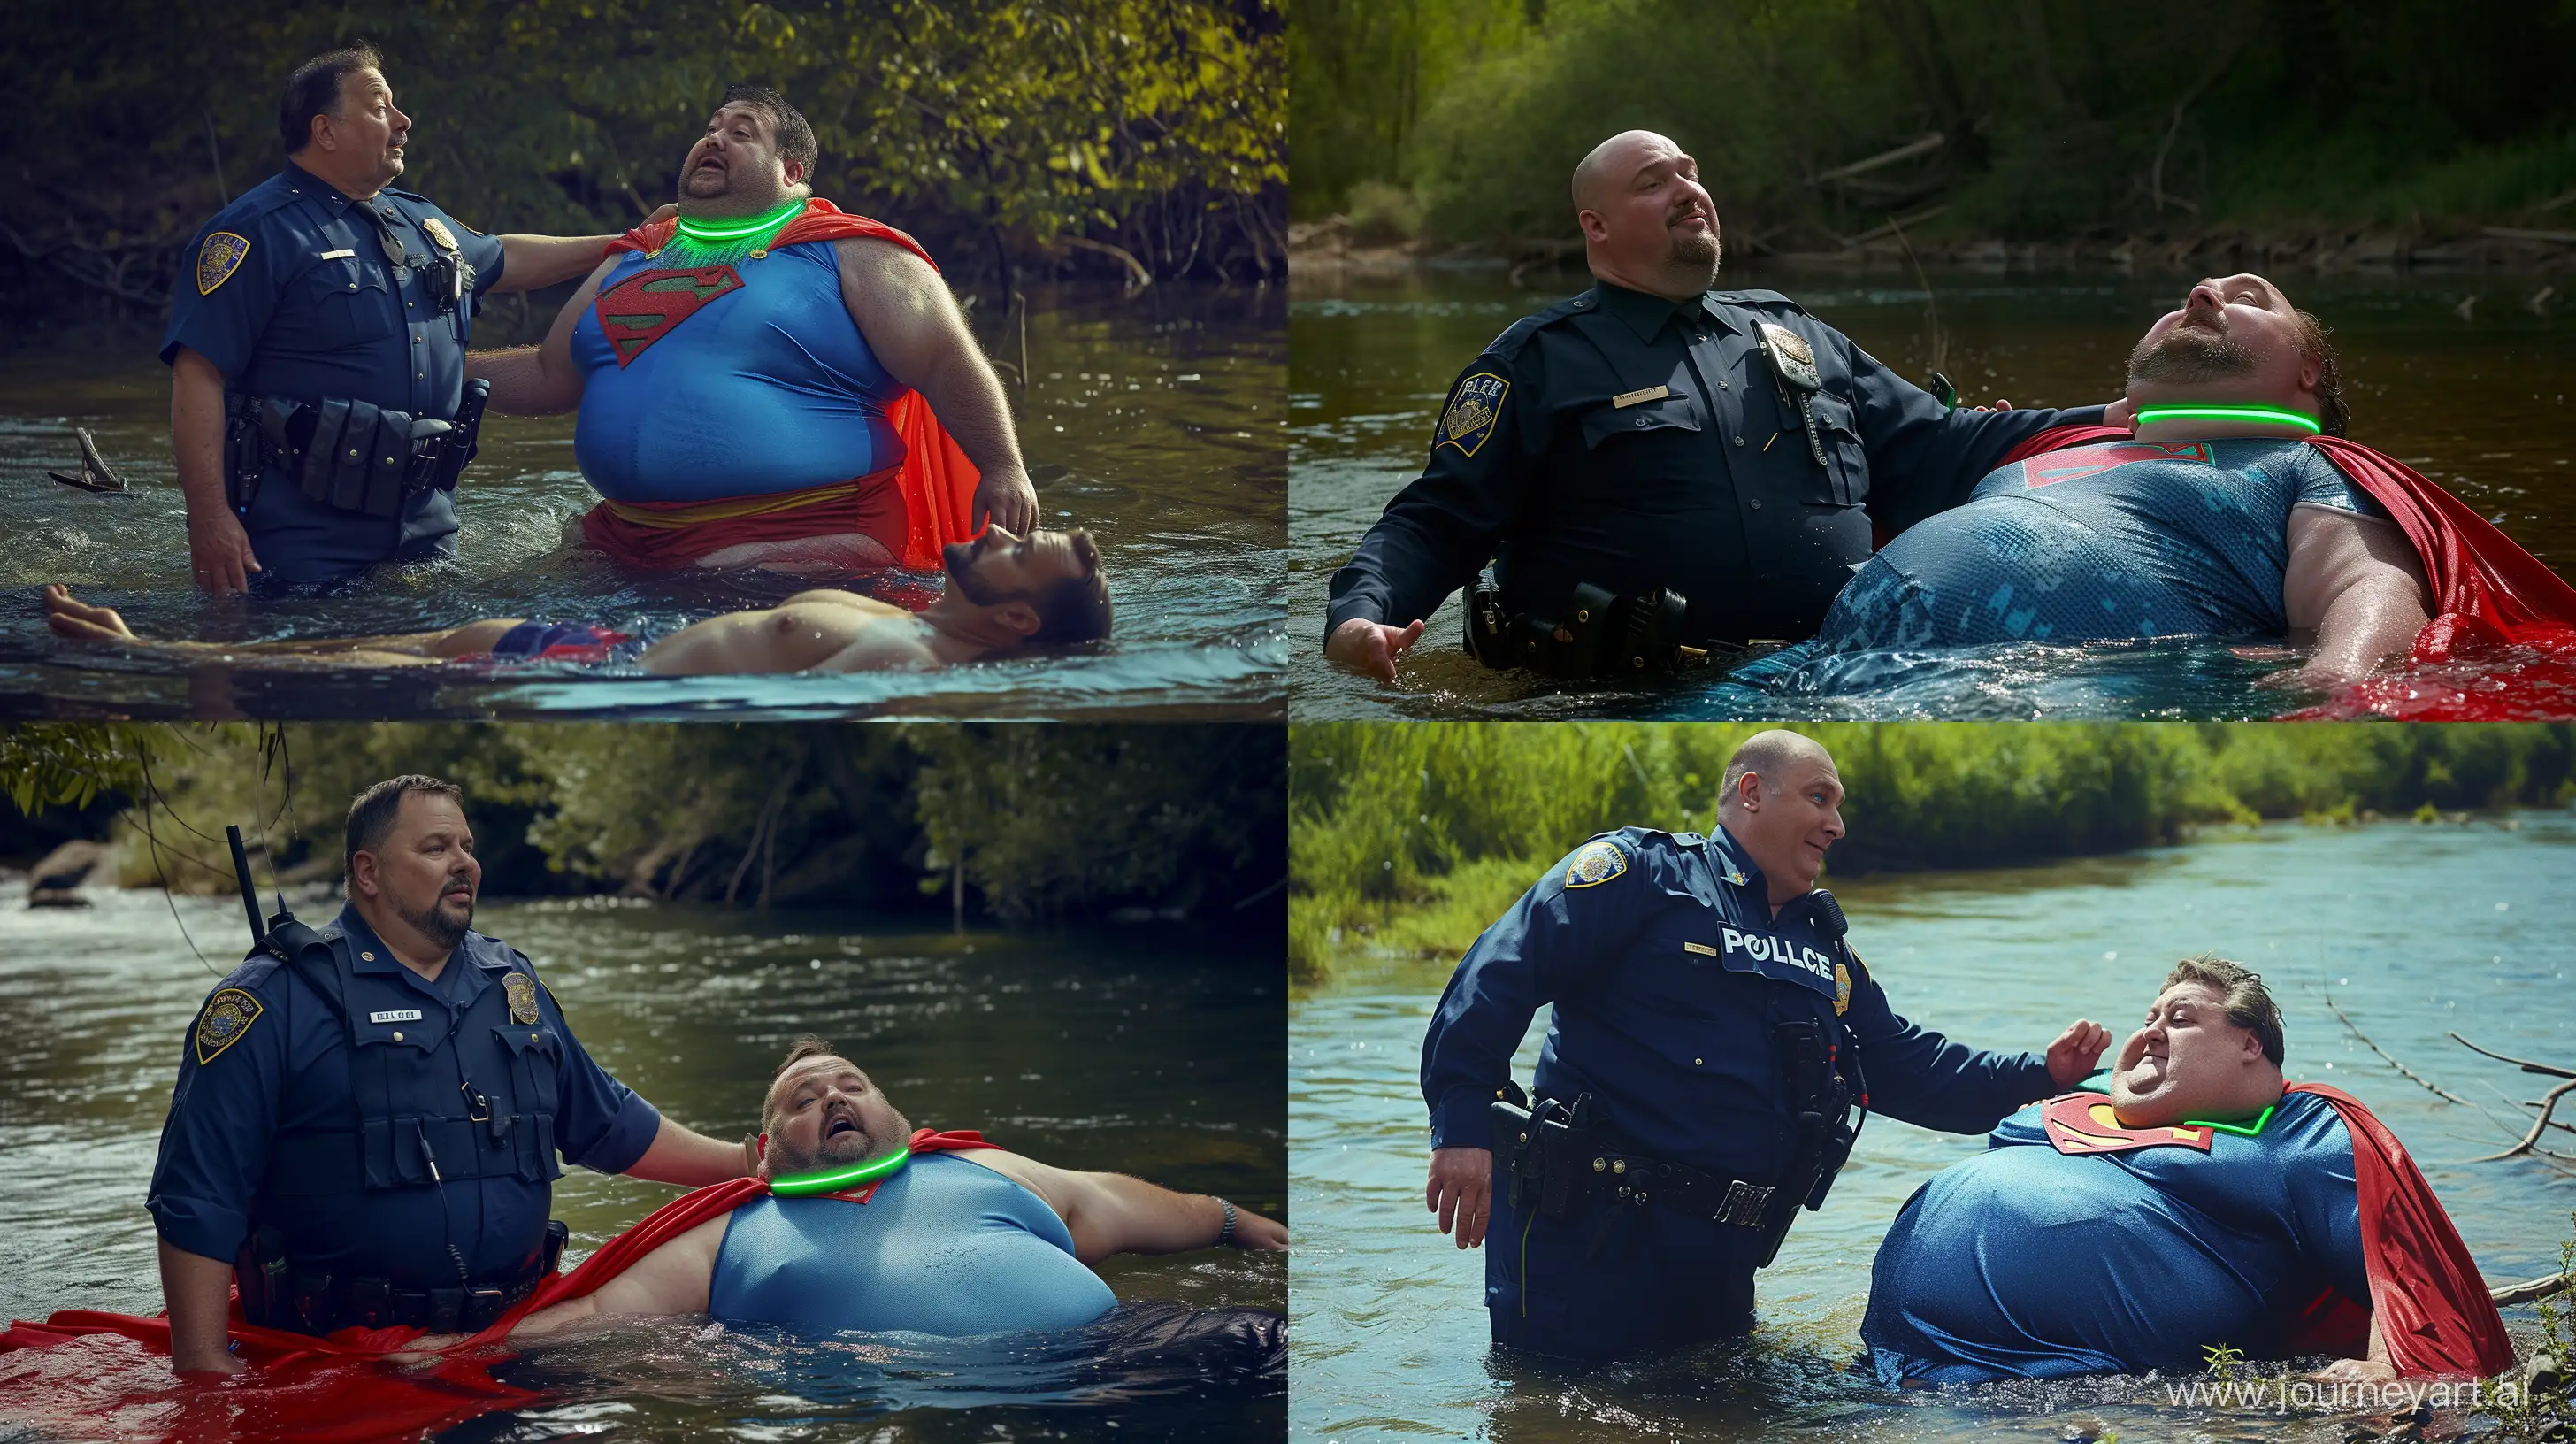 River-Rescue-Heroic-Police-Officer-Saves-Superman-in-Distress